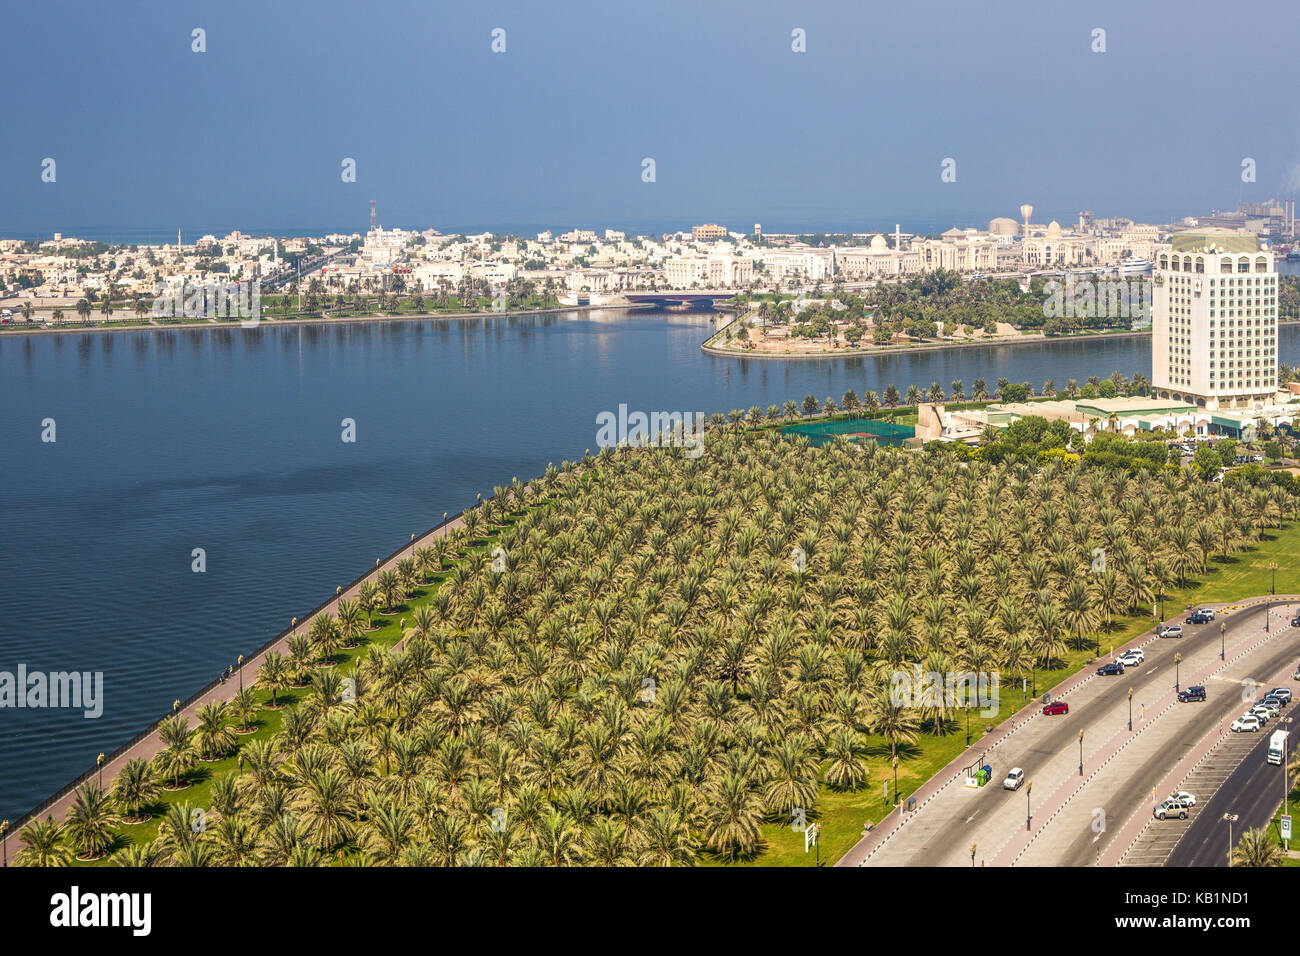 View at a palm grove, Sharjah, Stock Photo